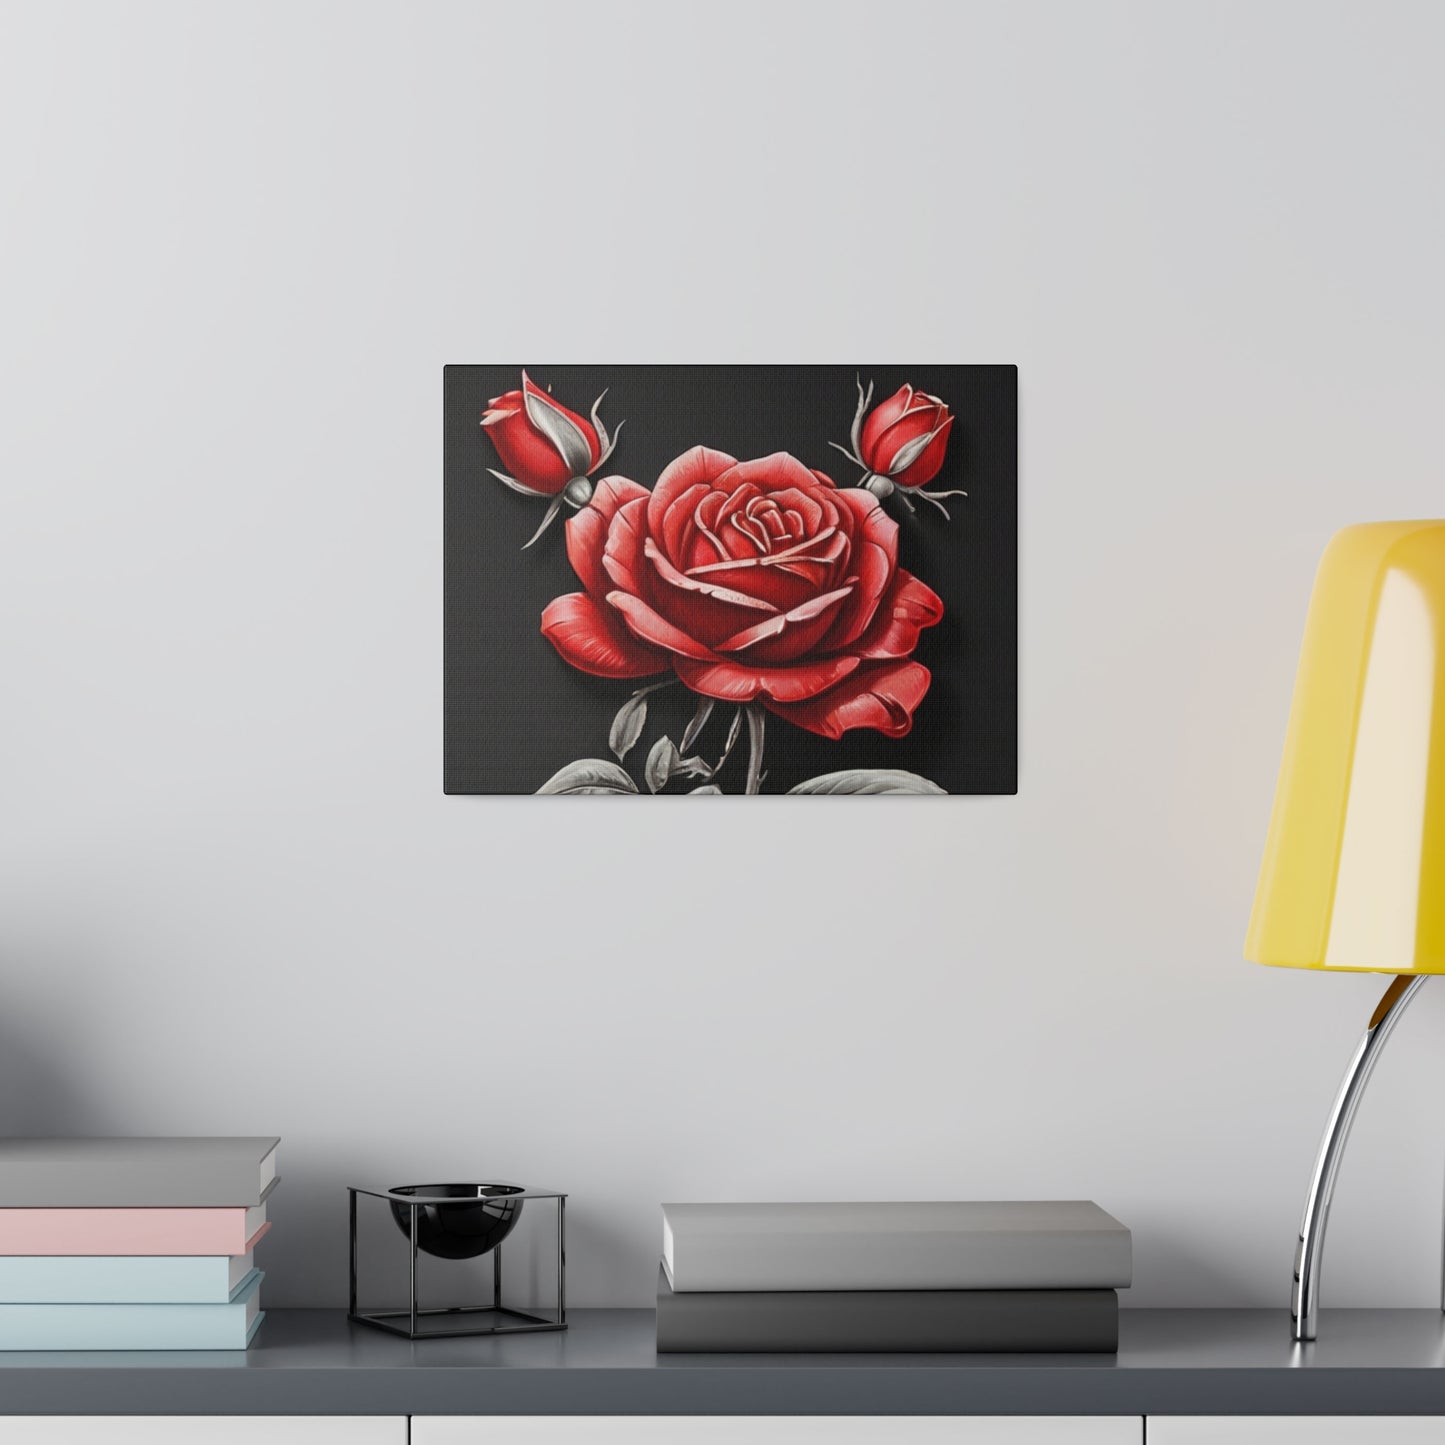 Red Rose Chalk Style Artwork - Matte Canvas, Stretched, 0.75"